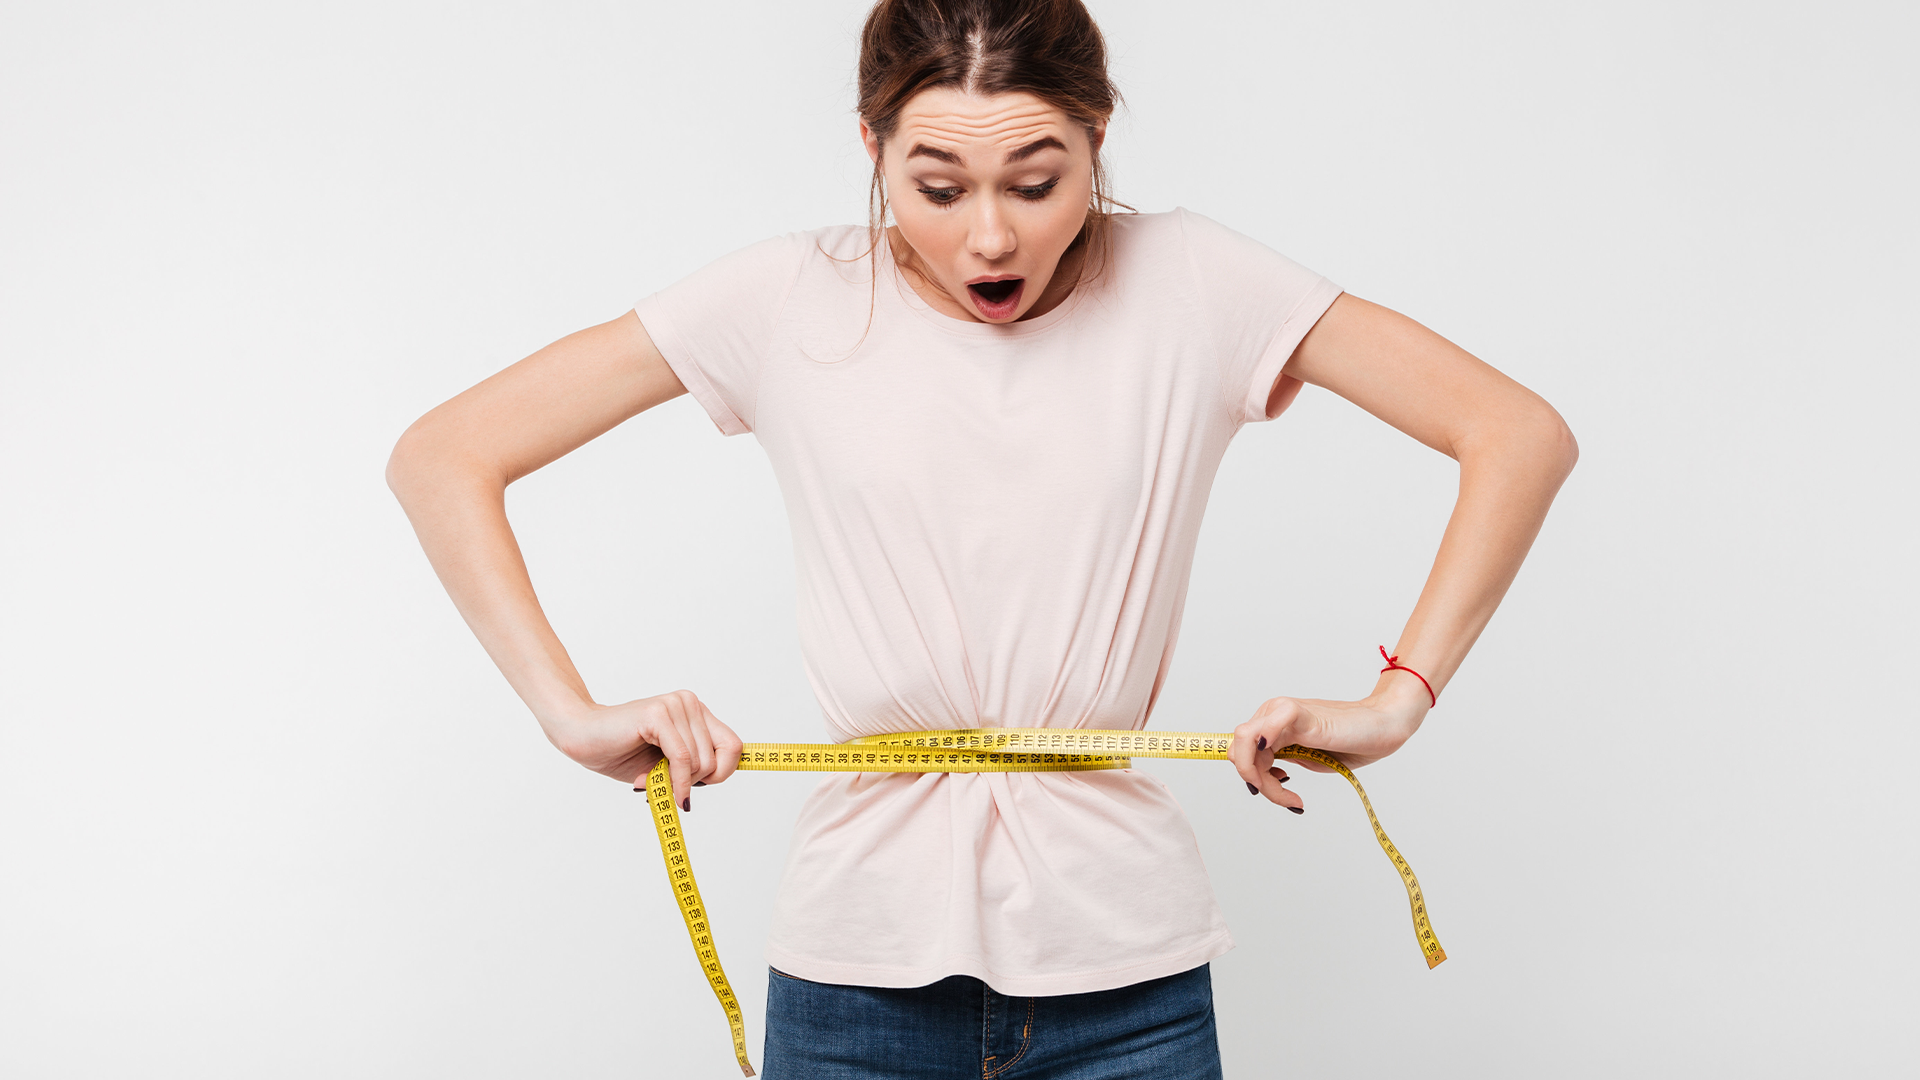 Weight Loss Safety 101 -Mitigating the Risk of Liberating ‘Fat Stored Toxins’